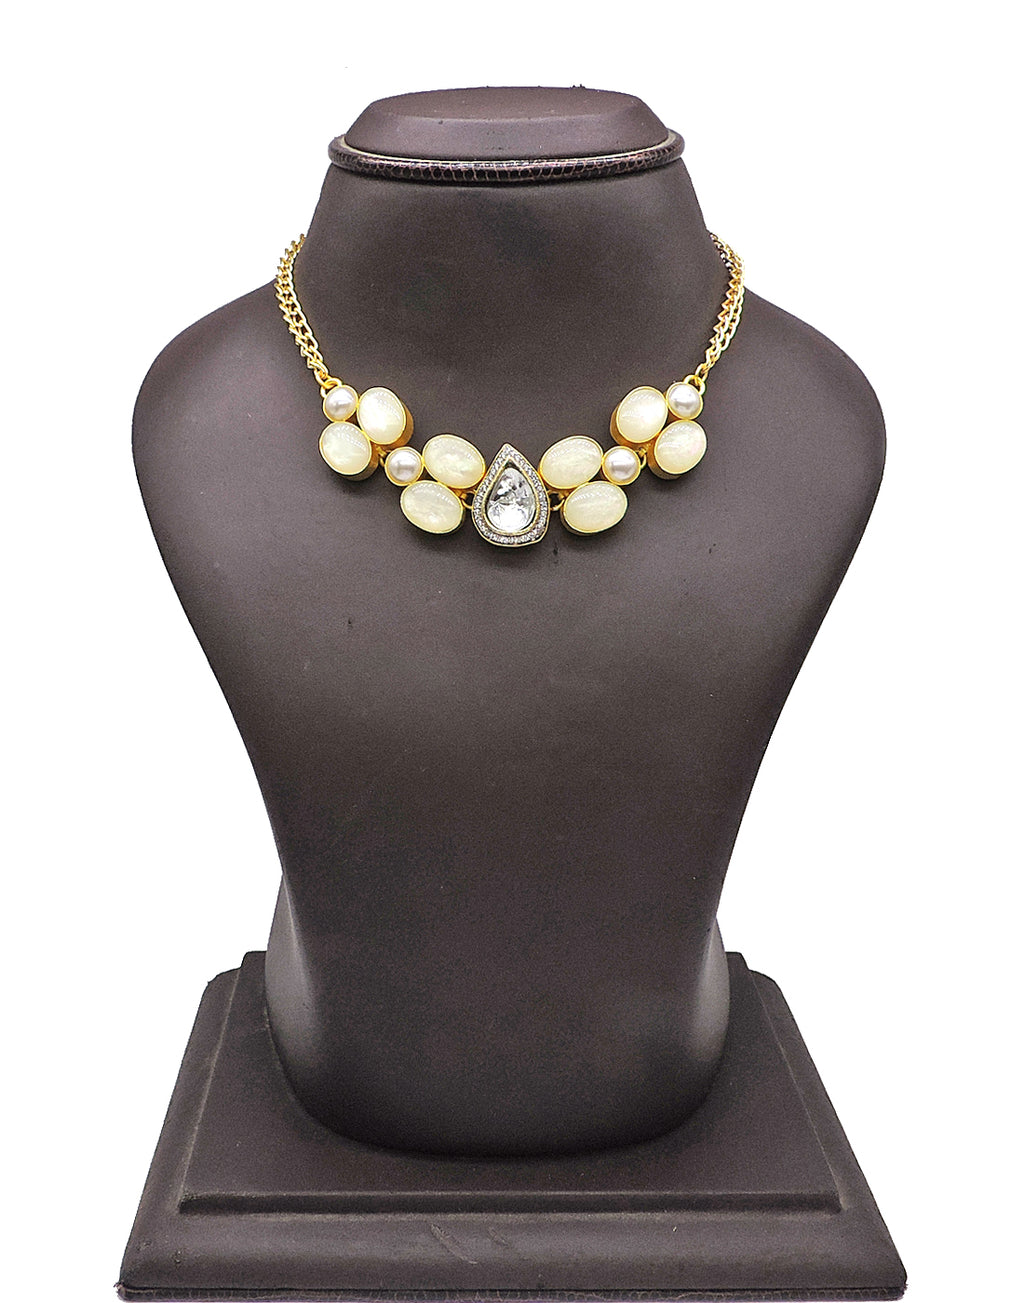 Crystal Teardrop Necklace - Statement Necklaces - Gold-Plated & Hypoallergenic Jewellery - Made in India - Dubai Jewellery - Dori